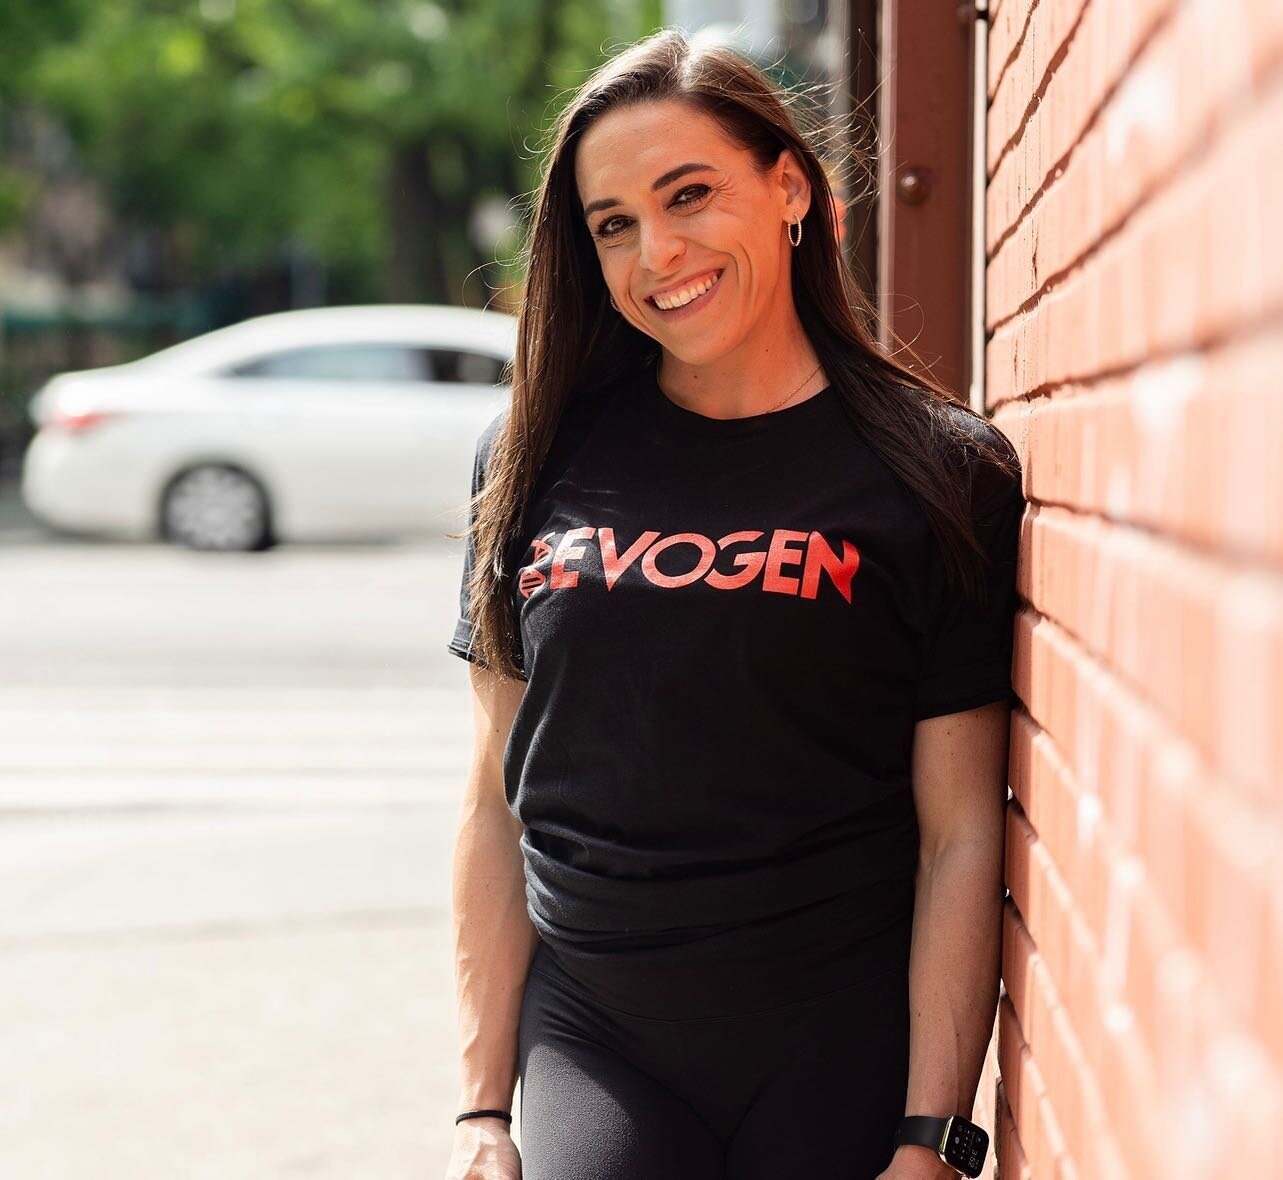 With every new day brings new opportunities.⭐️ 

Extremely excited to announce that I am now an @evogennutrition Elite Athlete 🧬
Thank you to @hanyrambod &amp; the rest of the Evogen Team for trusting me to represent Evogen. Proud to wear this name 